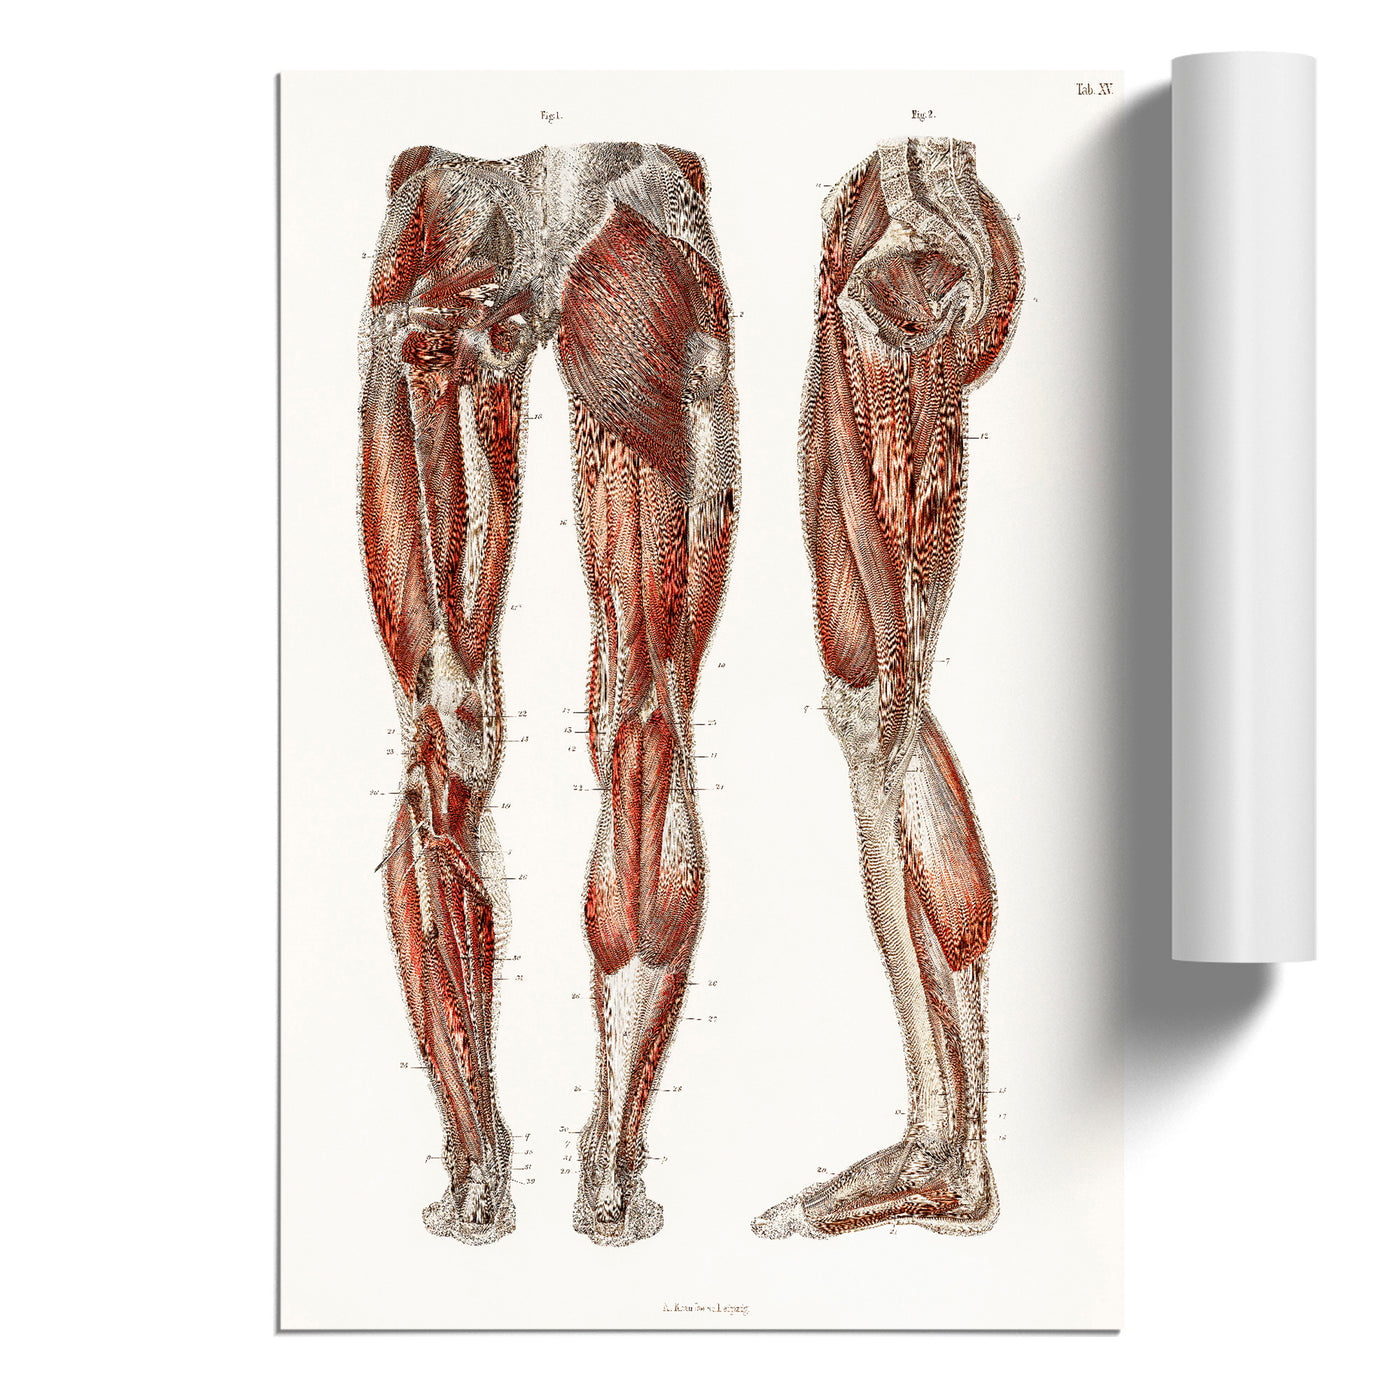 Anatomy Of The Leg Muscles By Carl Ernst Bock